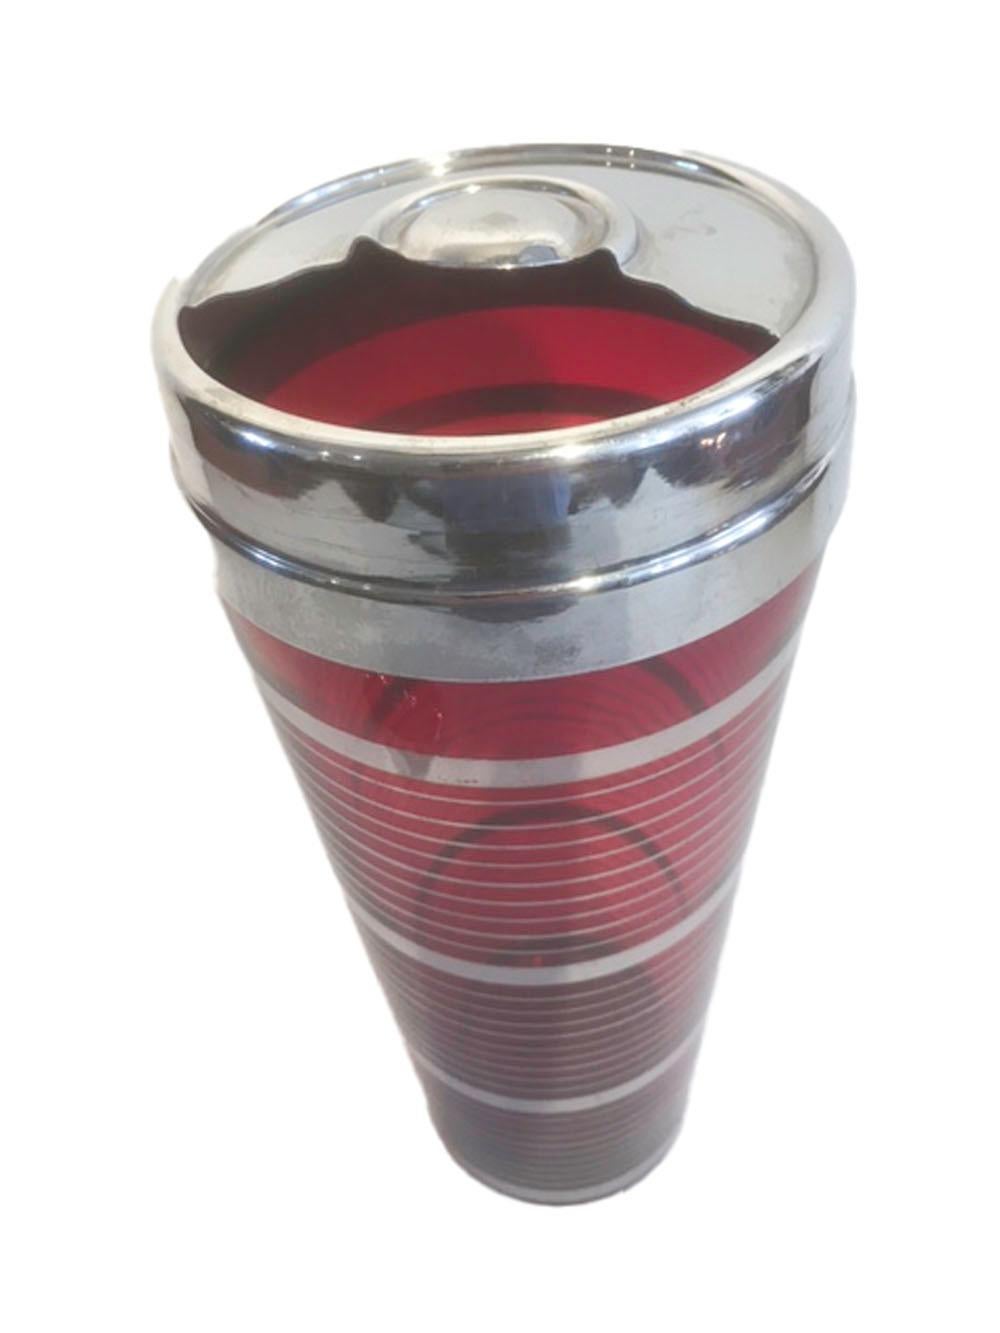 20th Century Art Deco Cocktail Shaker, Ruby Red Glass with Silver Bands and Chrome Lid